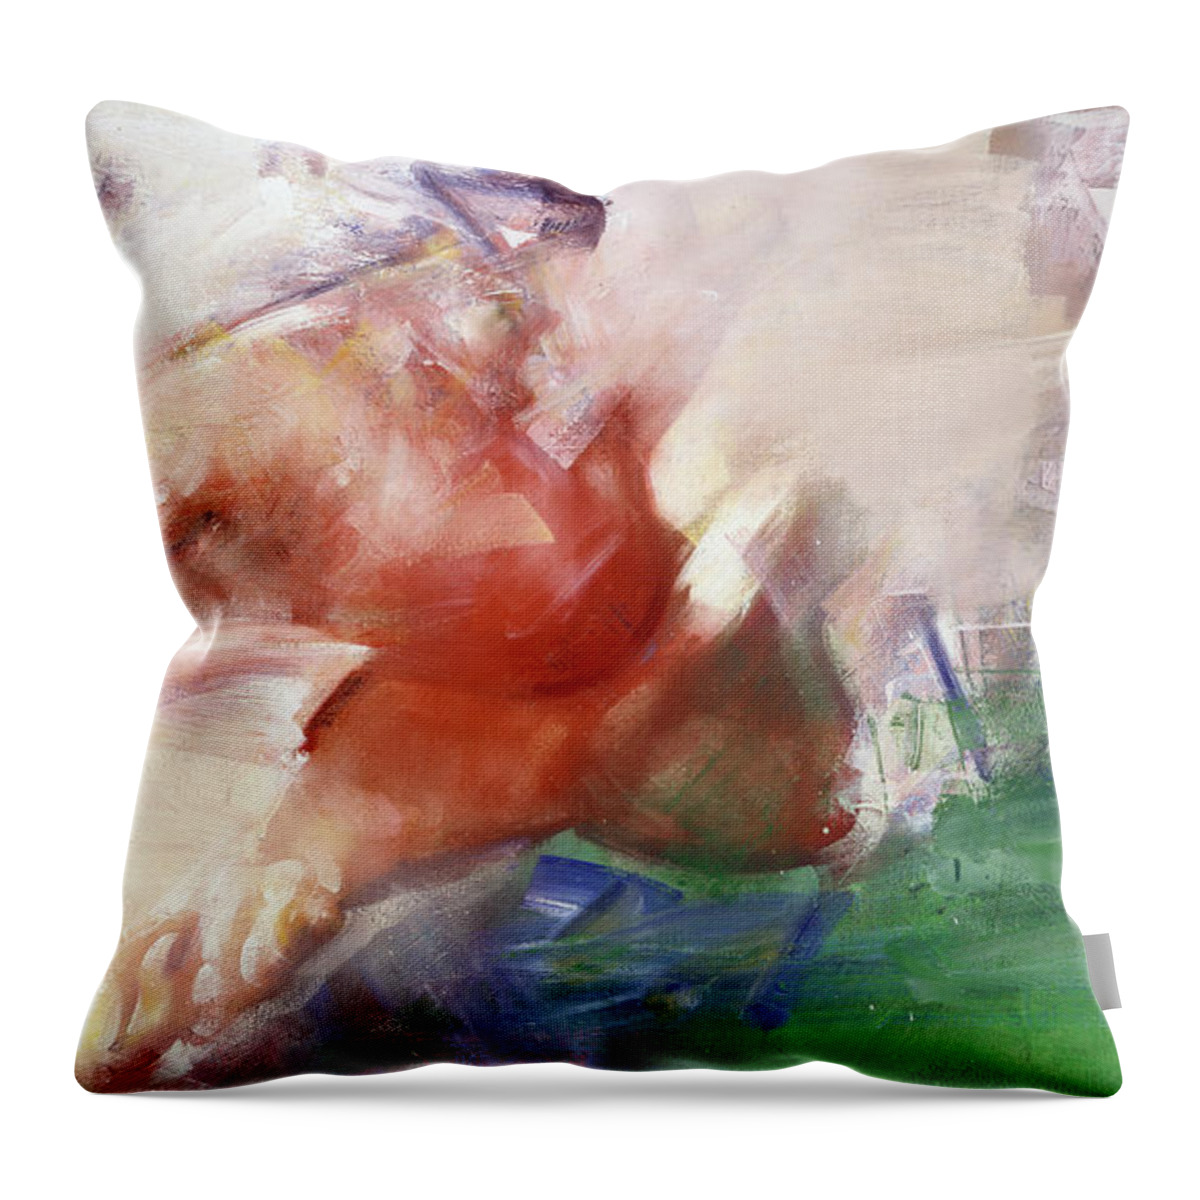 Enamel Throw Pillow featuring the painting Carla's Dream #2 by Ritchard Rodriguez